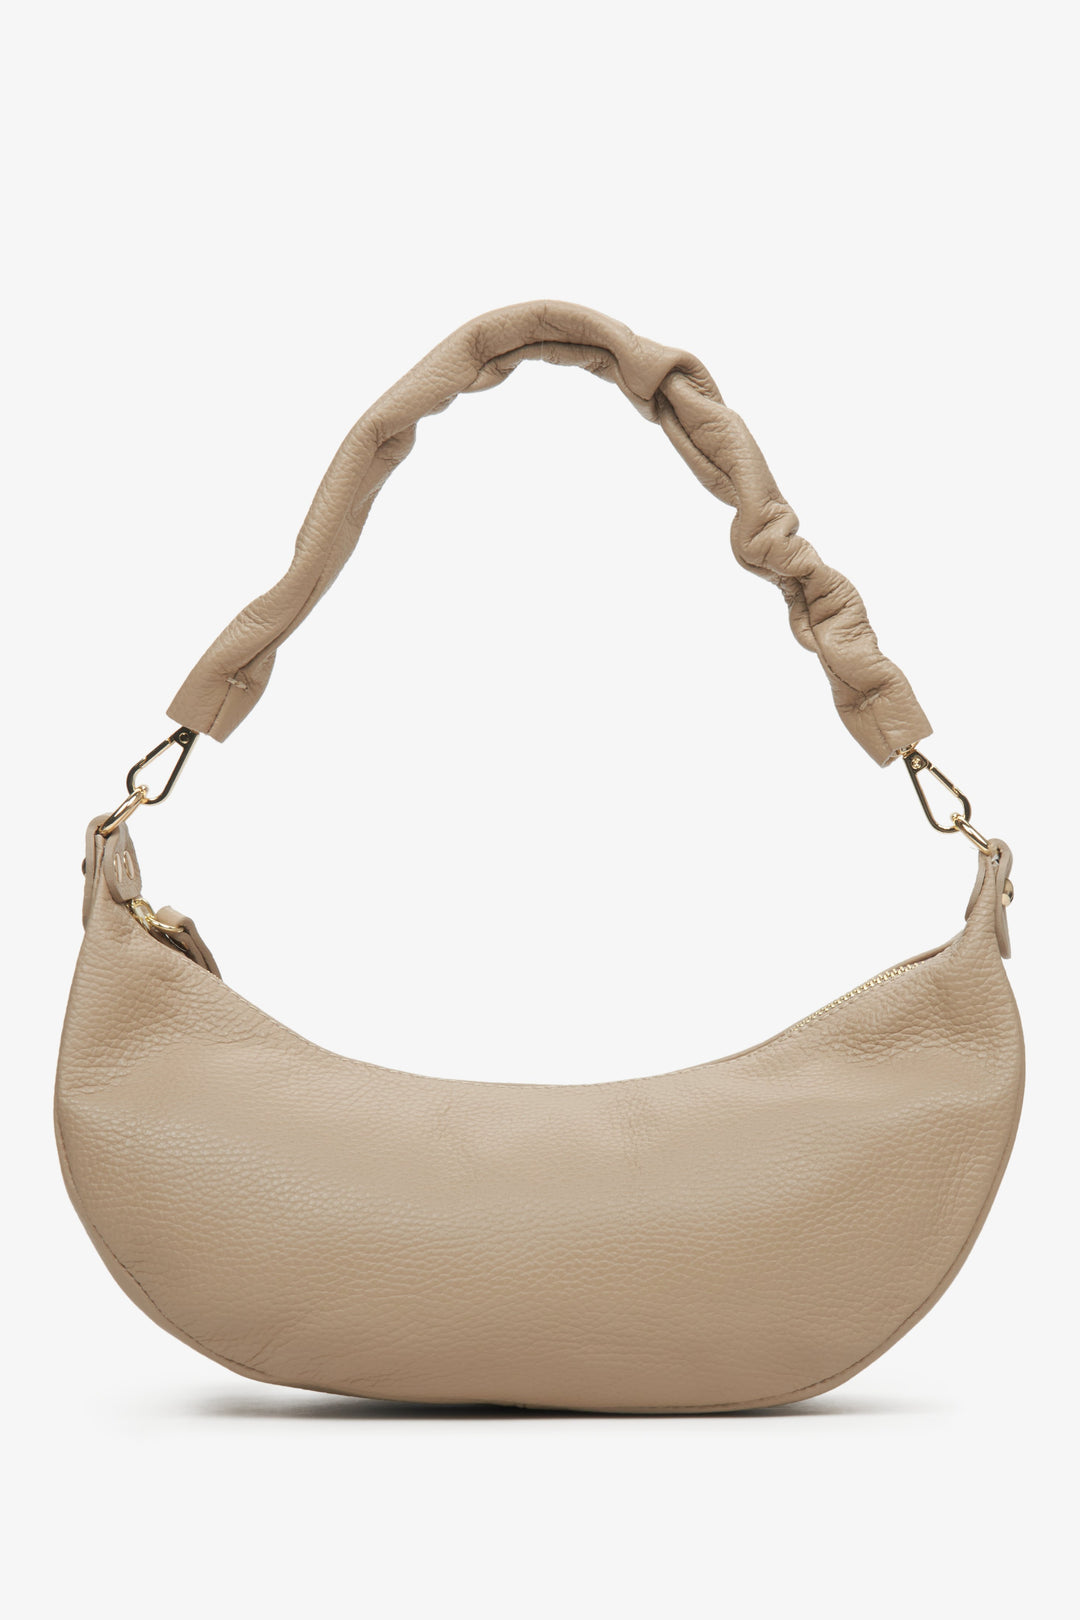 Elegant half-moon women's bag by Estro with braided hand in beige colour.